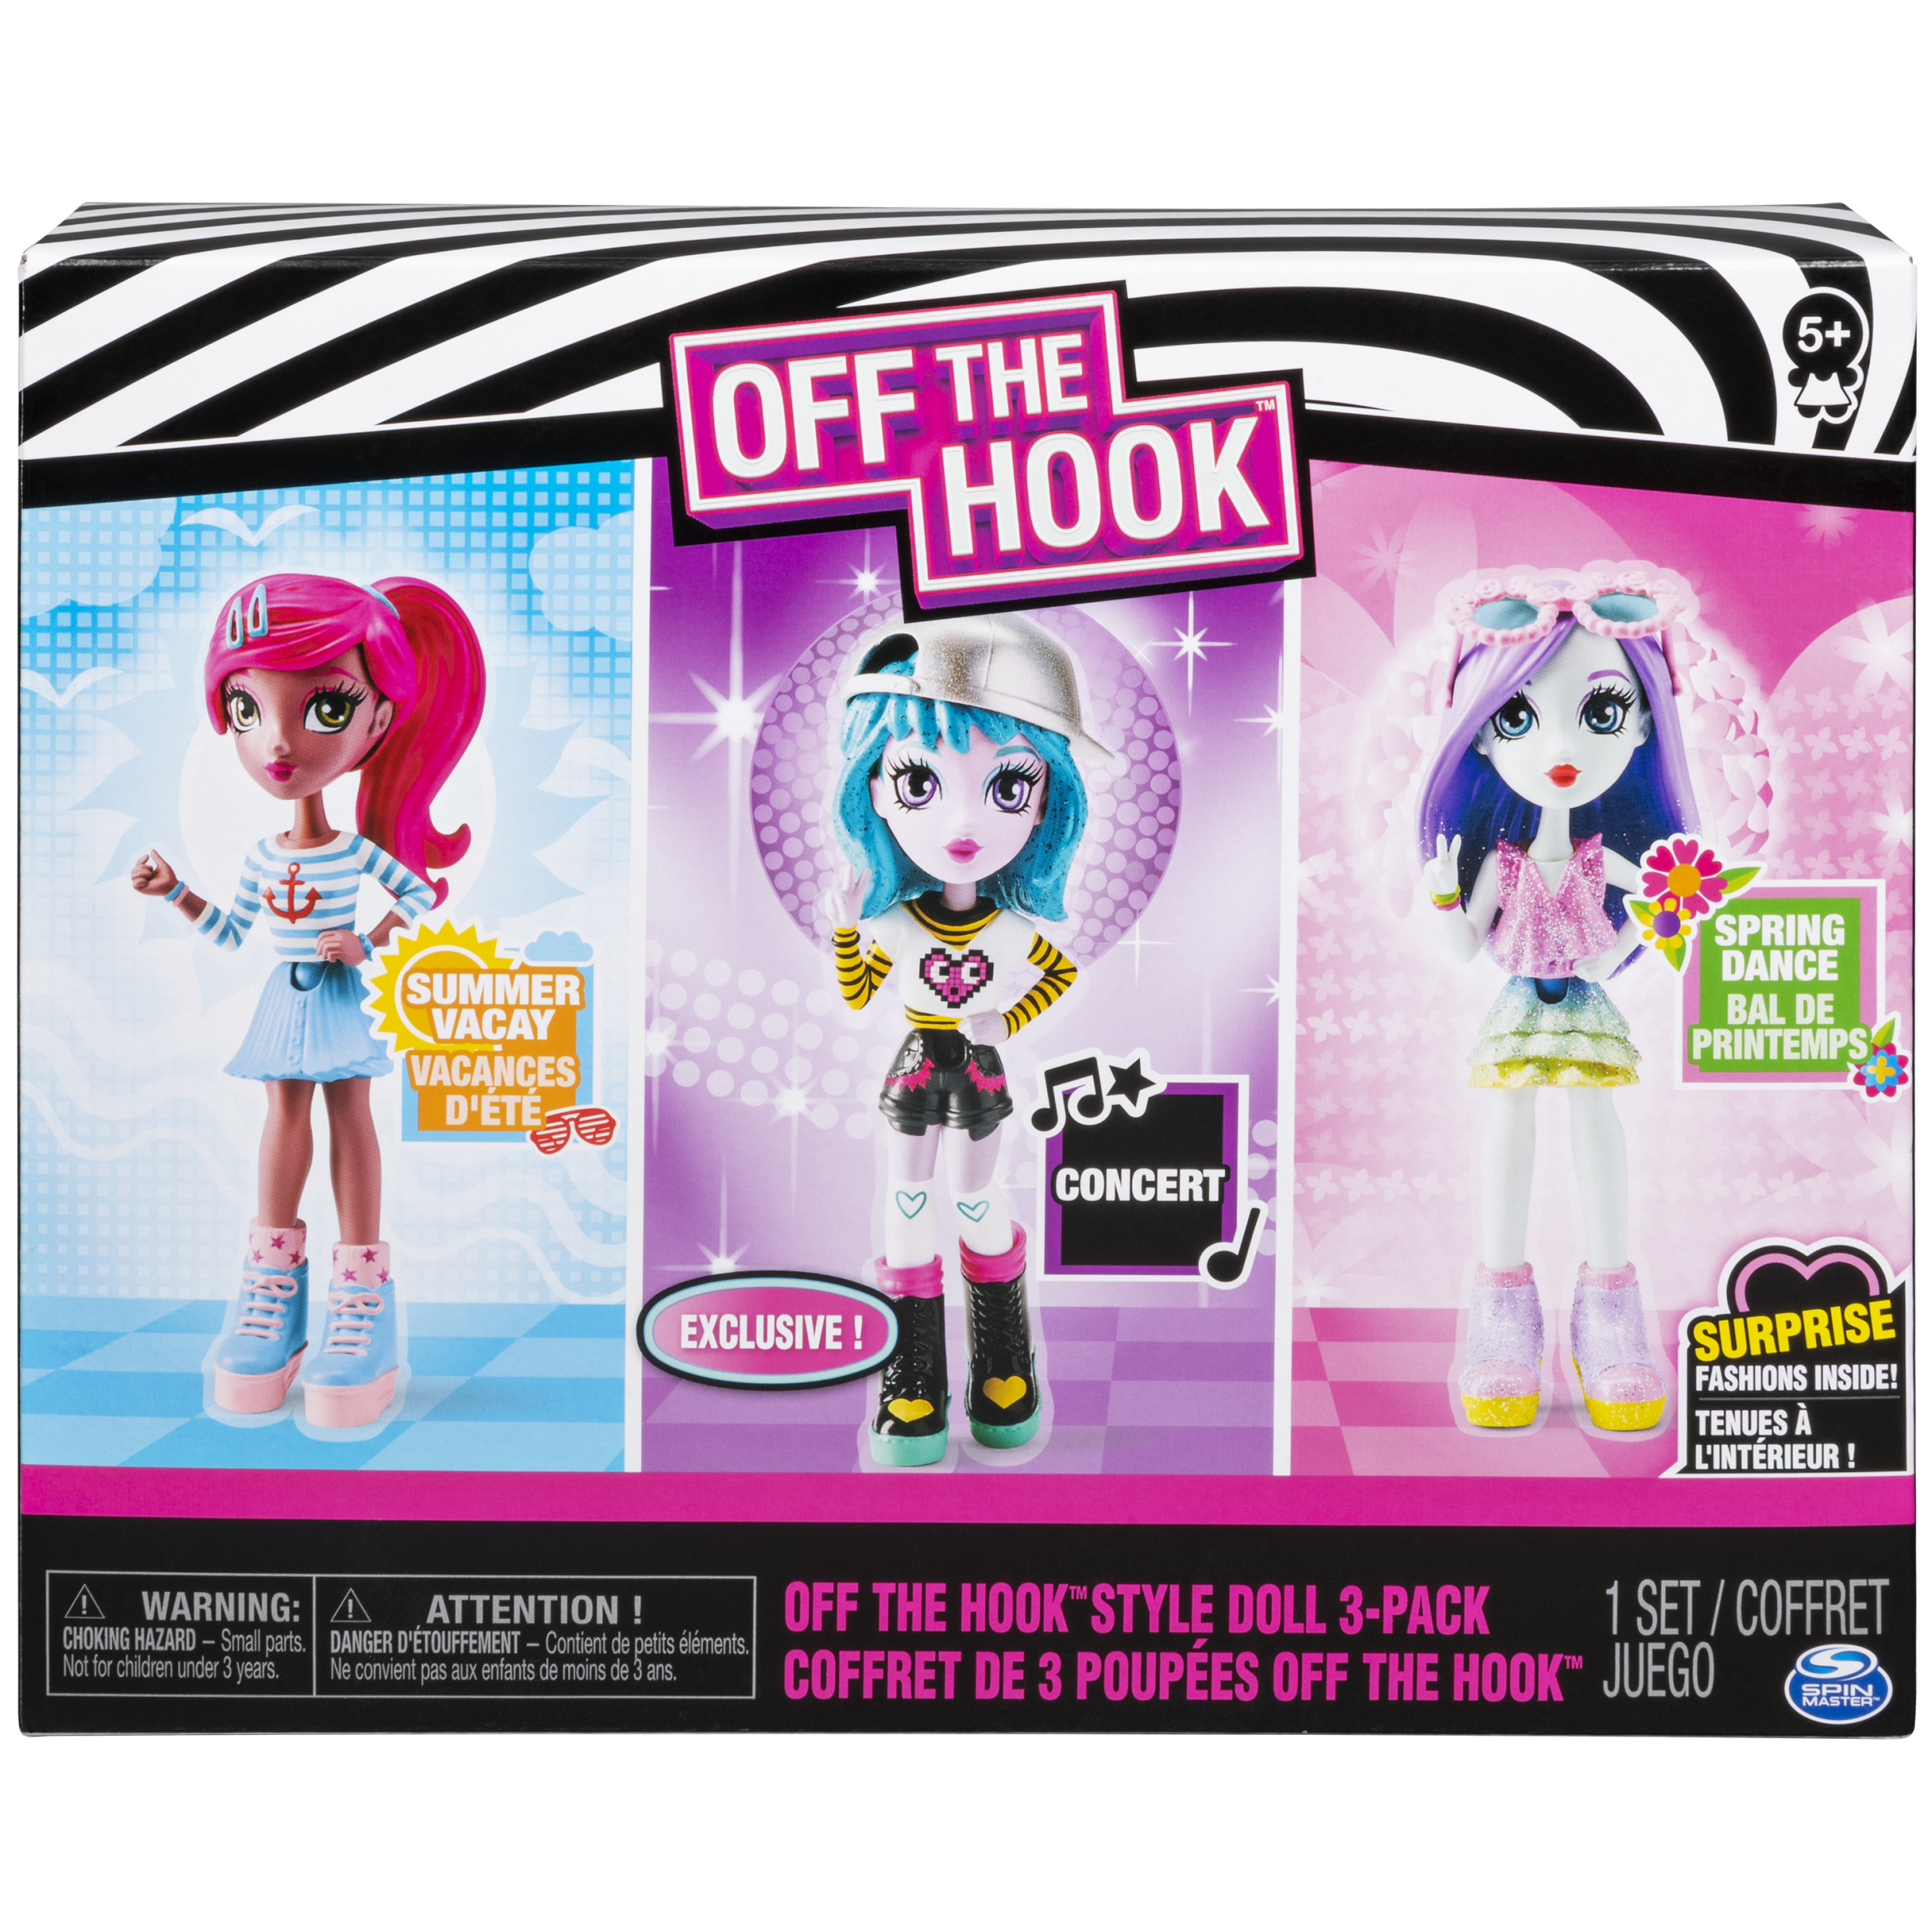 Off the Hook Style Doll 3 Pack - image 3 of 8